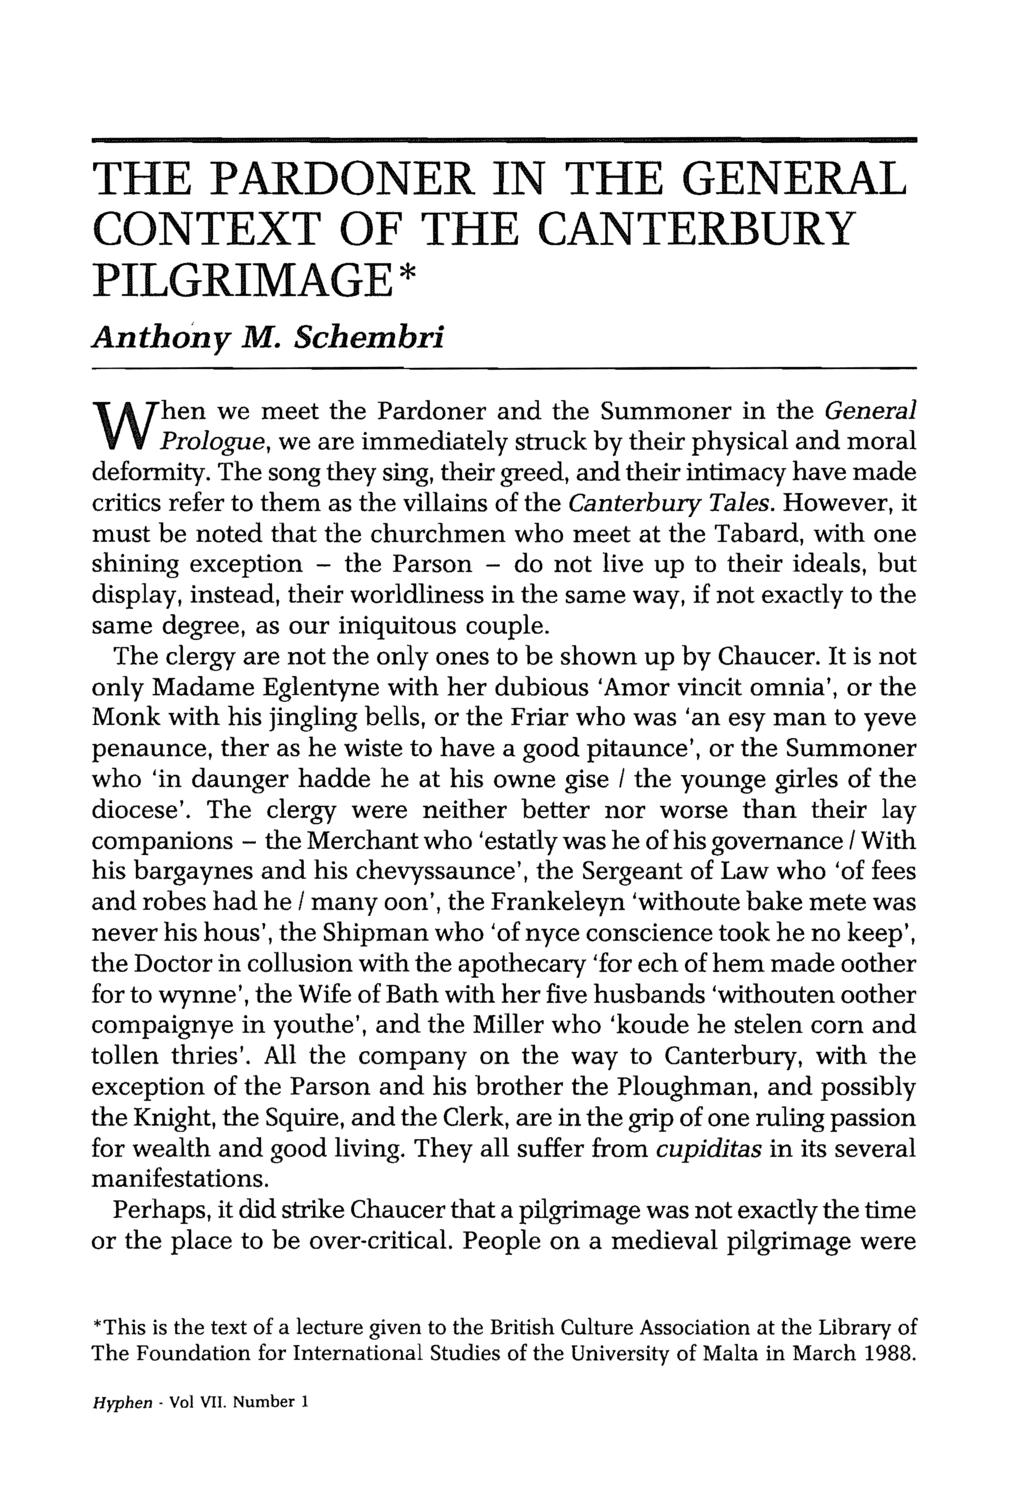 THE PARDONER IN THE GENERAL CONTEXT OF THE CANTERBURY PILGRIMAGE * Anthony M.